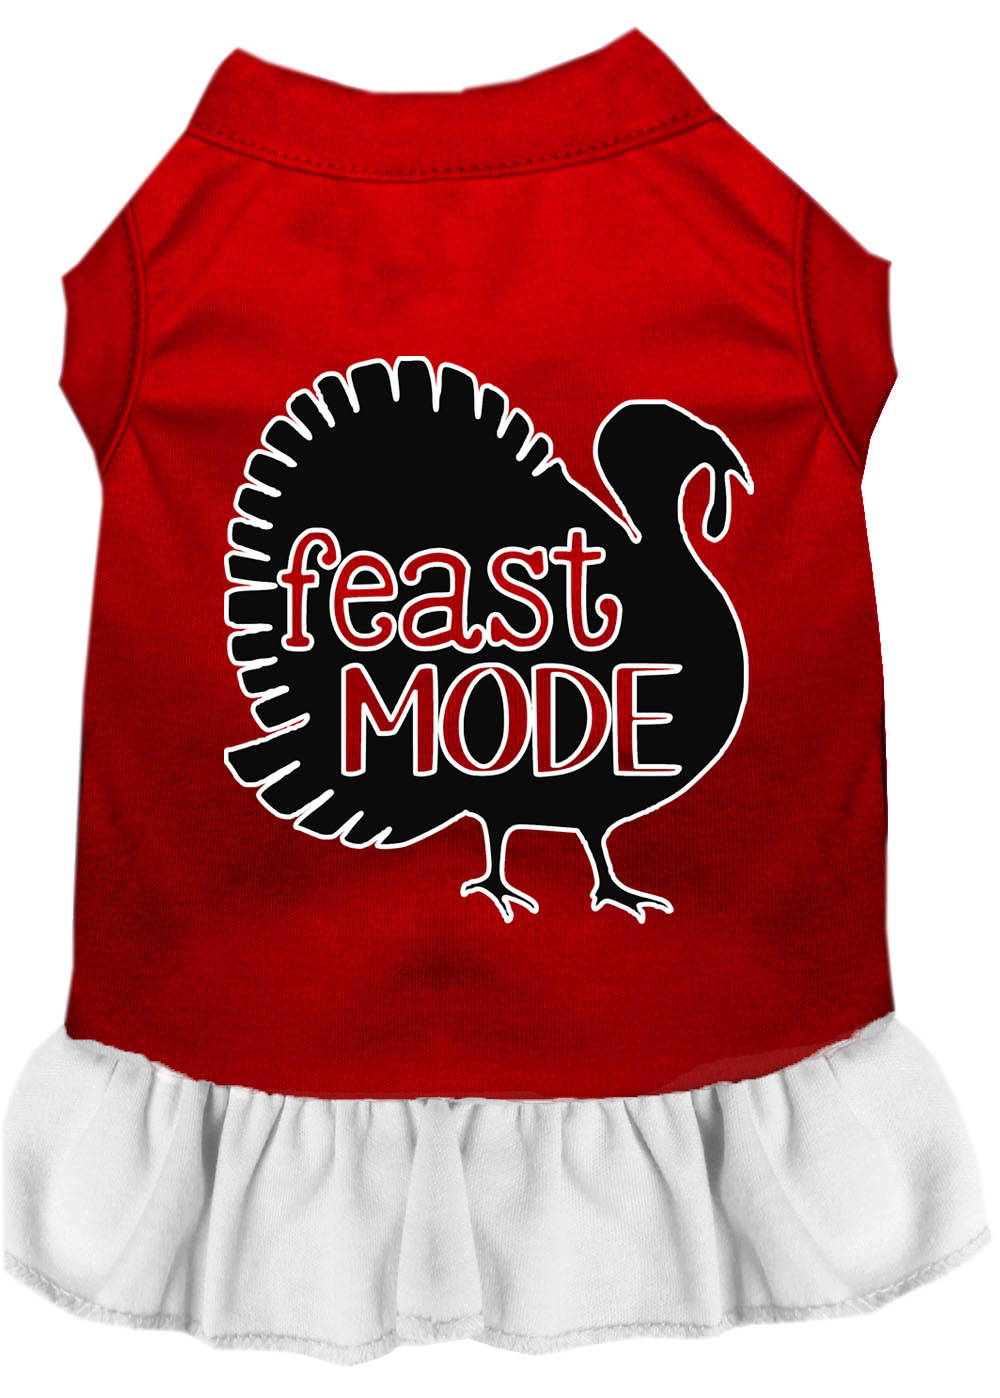 Feast Mode Screen Print Dog Dress Red with White Sm